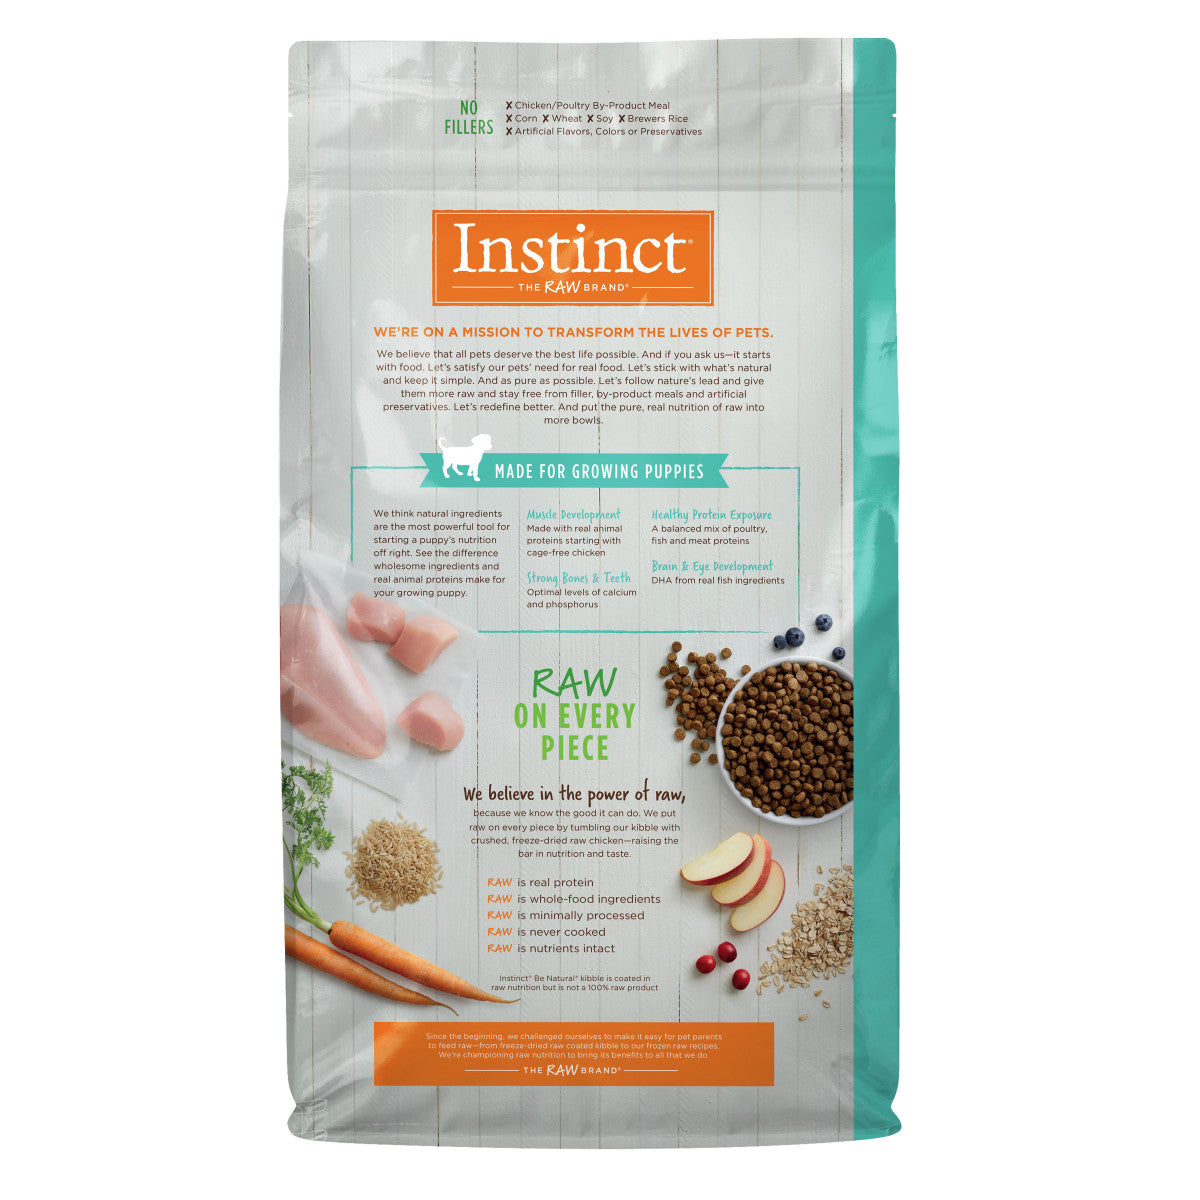 Instinct - Be Natural Real Chicken & Brown Rice Recipe (For Puppies)